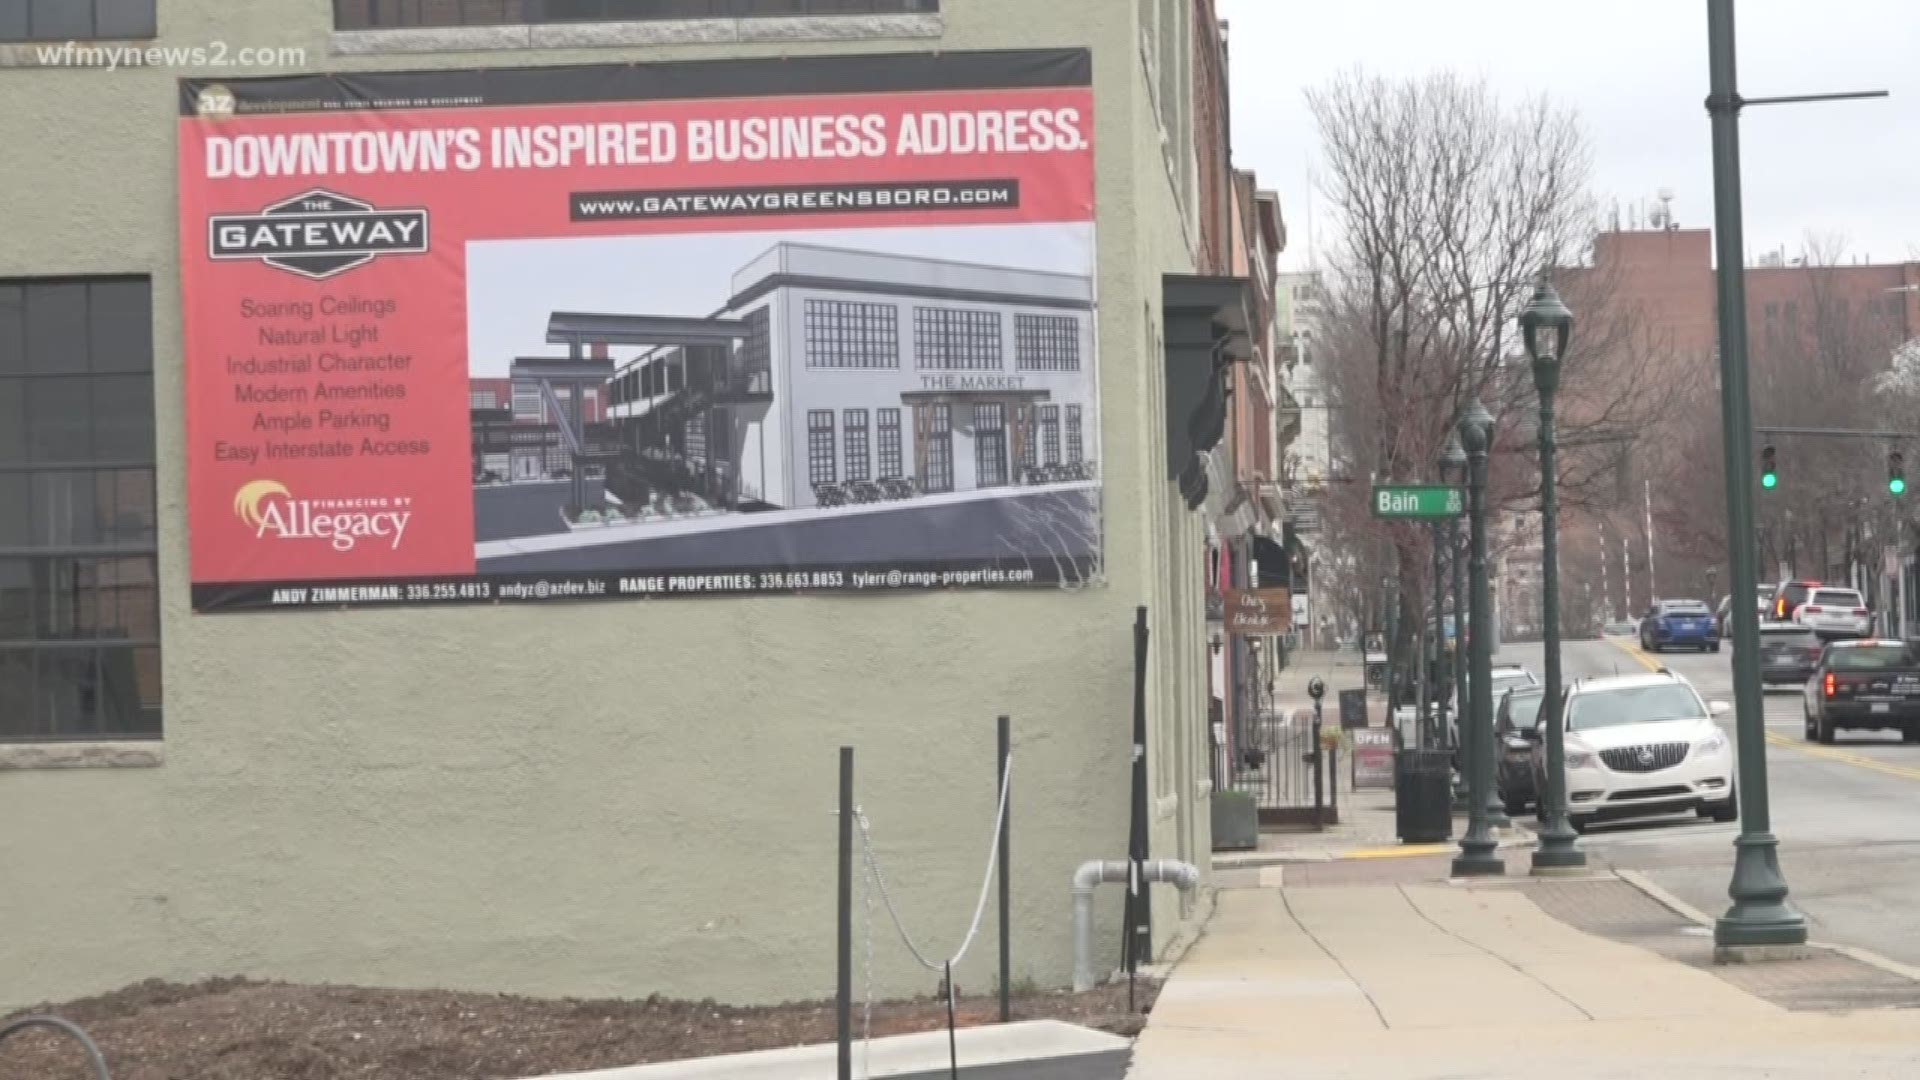 A successful fashion company is shopping for a new home and it might be here.
Centric Brands Inc. is considering setting up shop in Greensboro.
Today, the City Council approved hundreds of thousands of dollars in incentives to lure the company here.